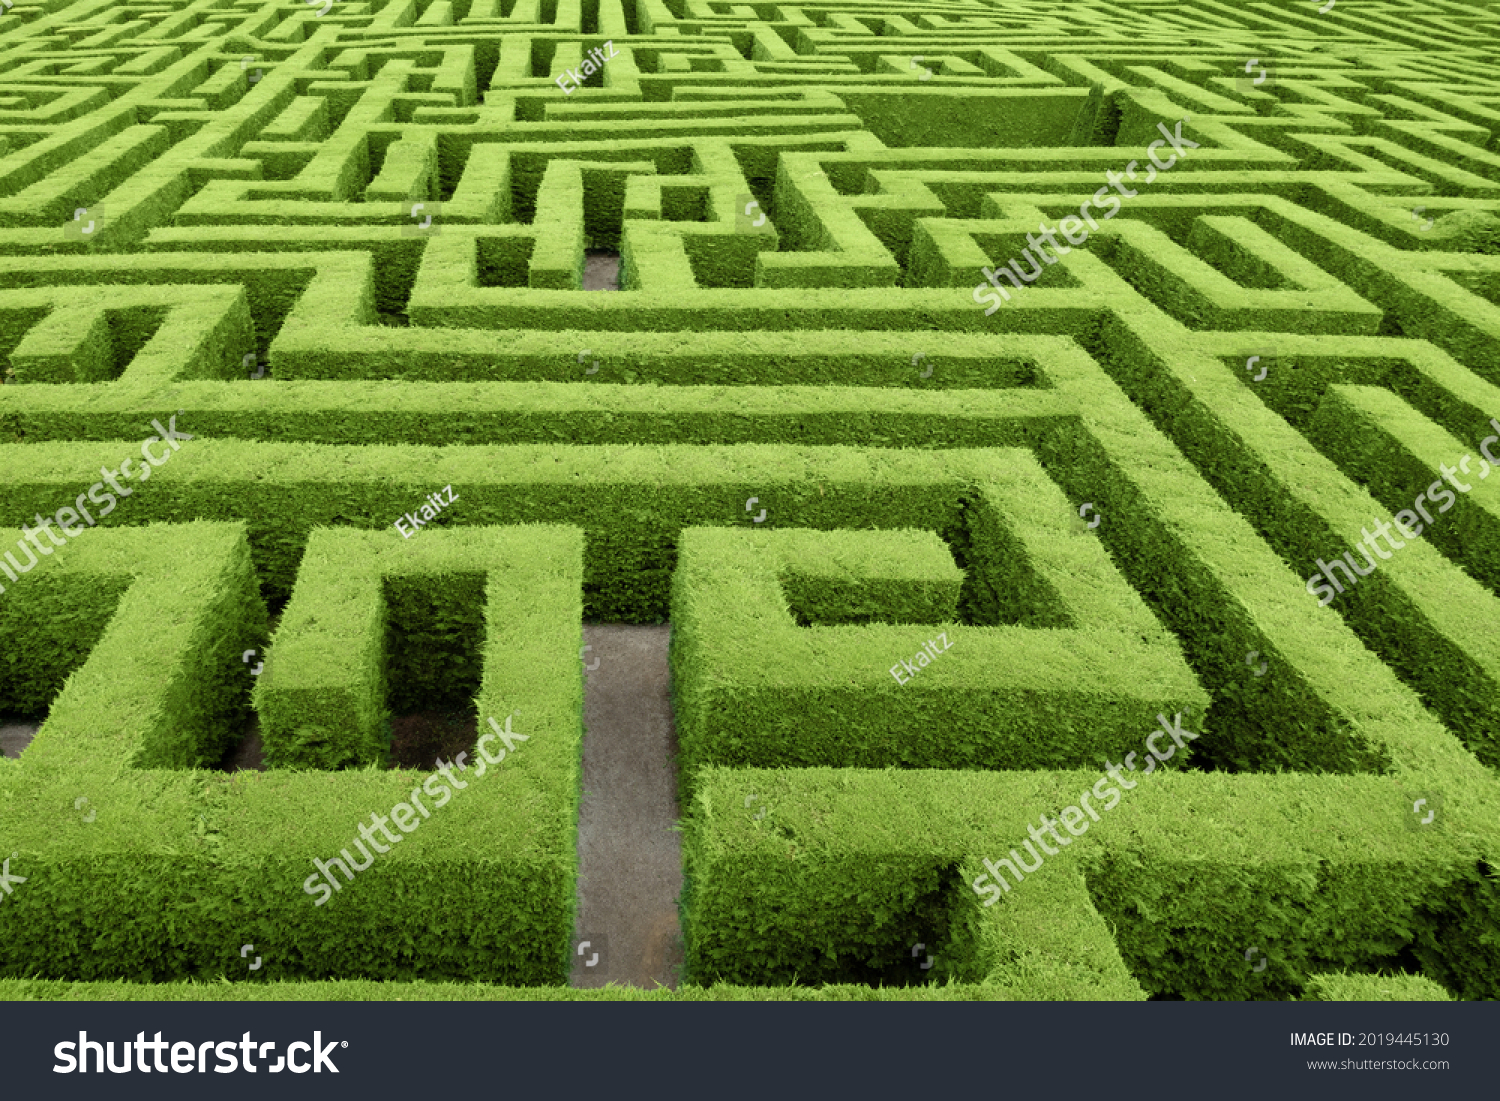 Hedge cut into a maze like puzzle pattern forming a garden labyrinth #2019445130